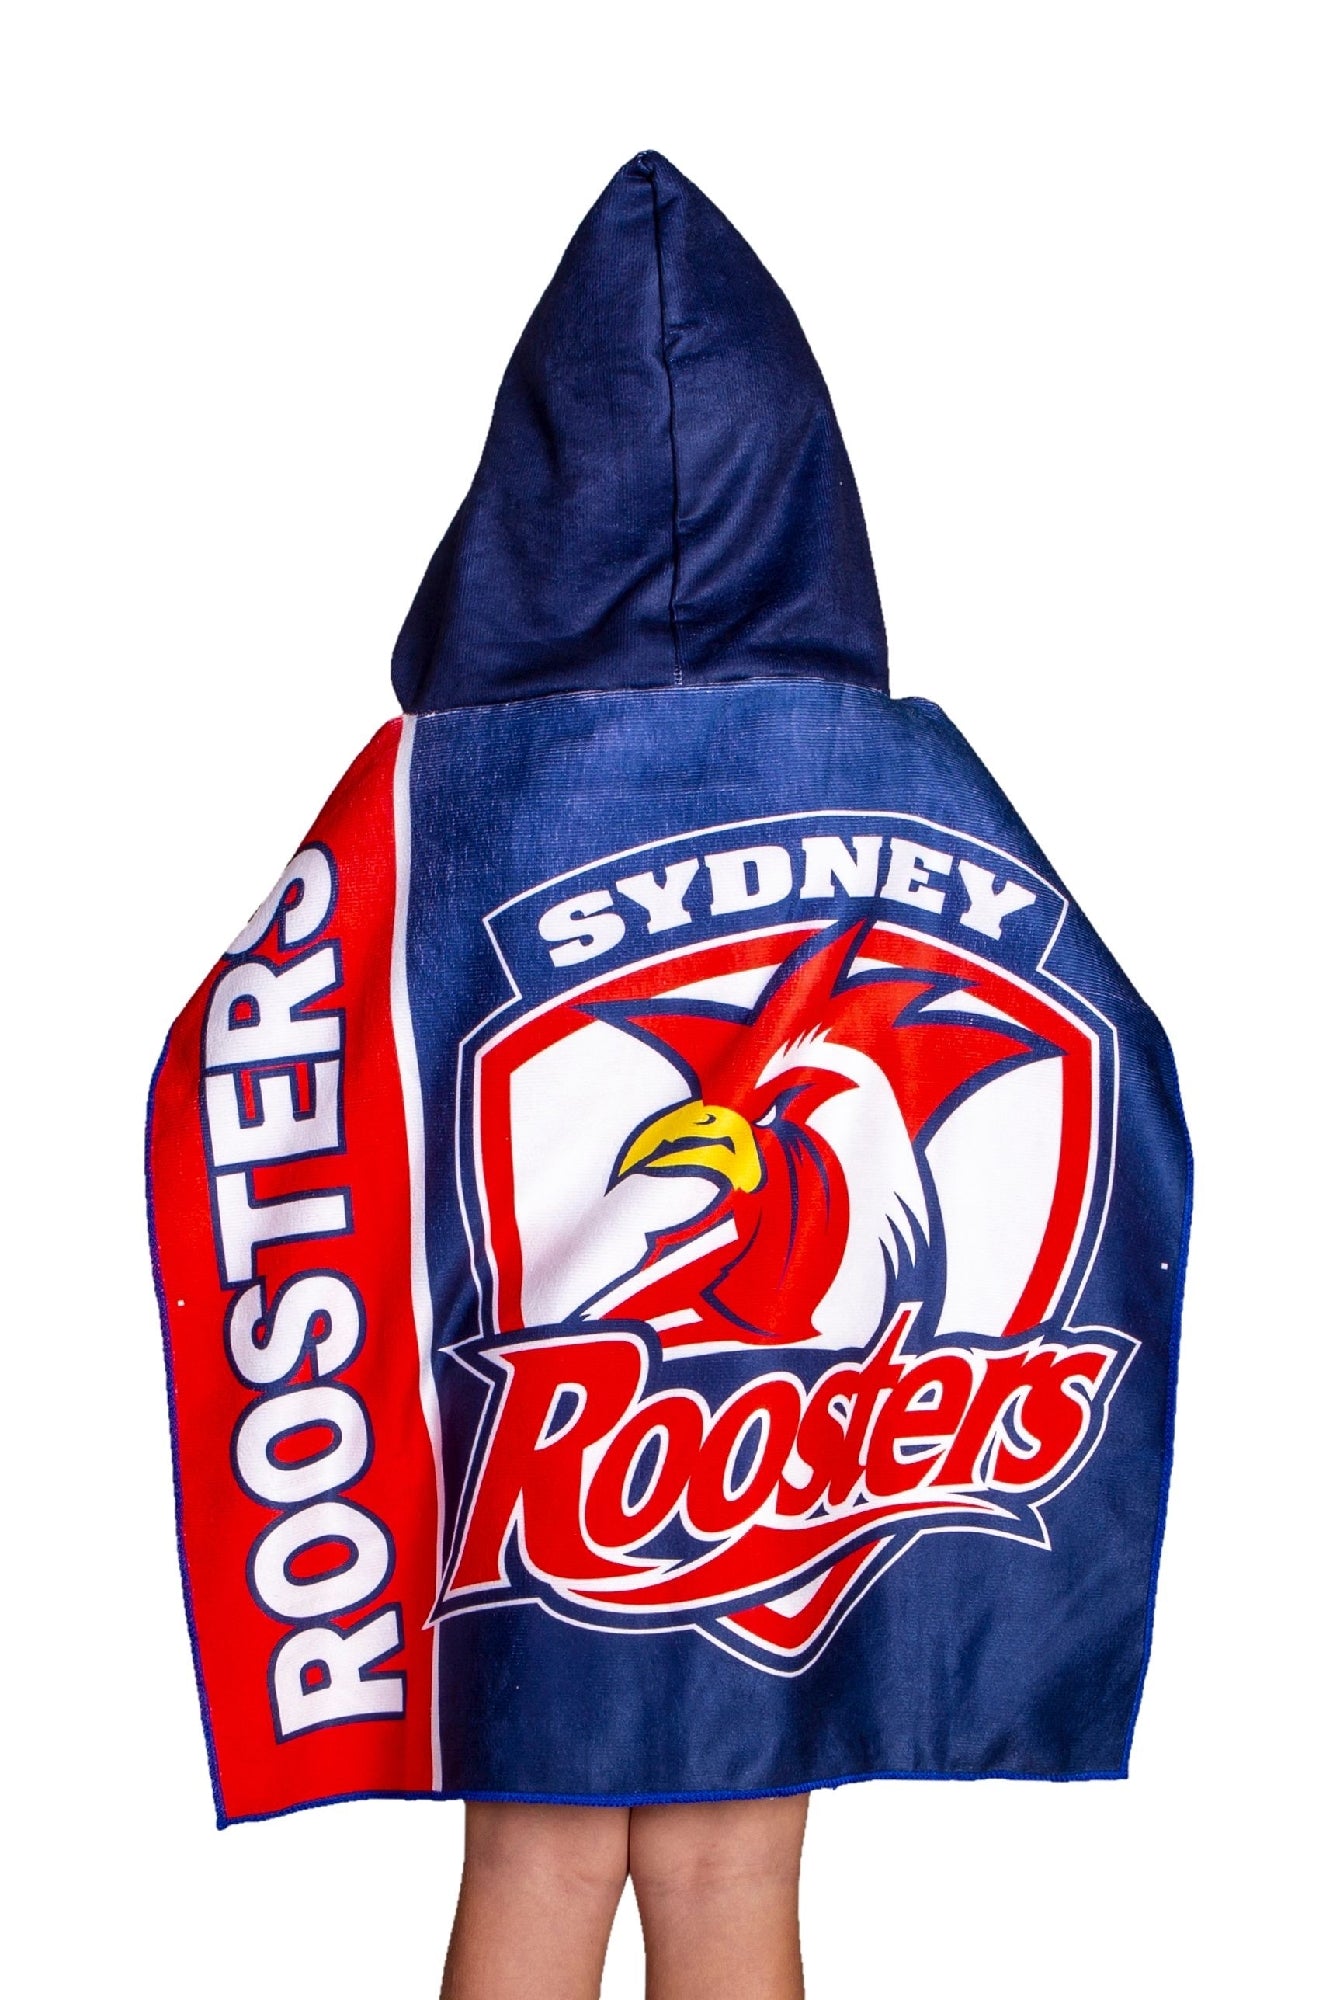 Sydney Roosters Mascot Hooded Towel